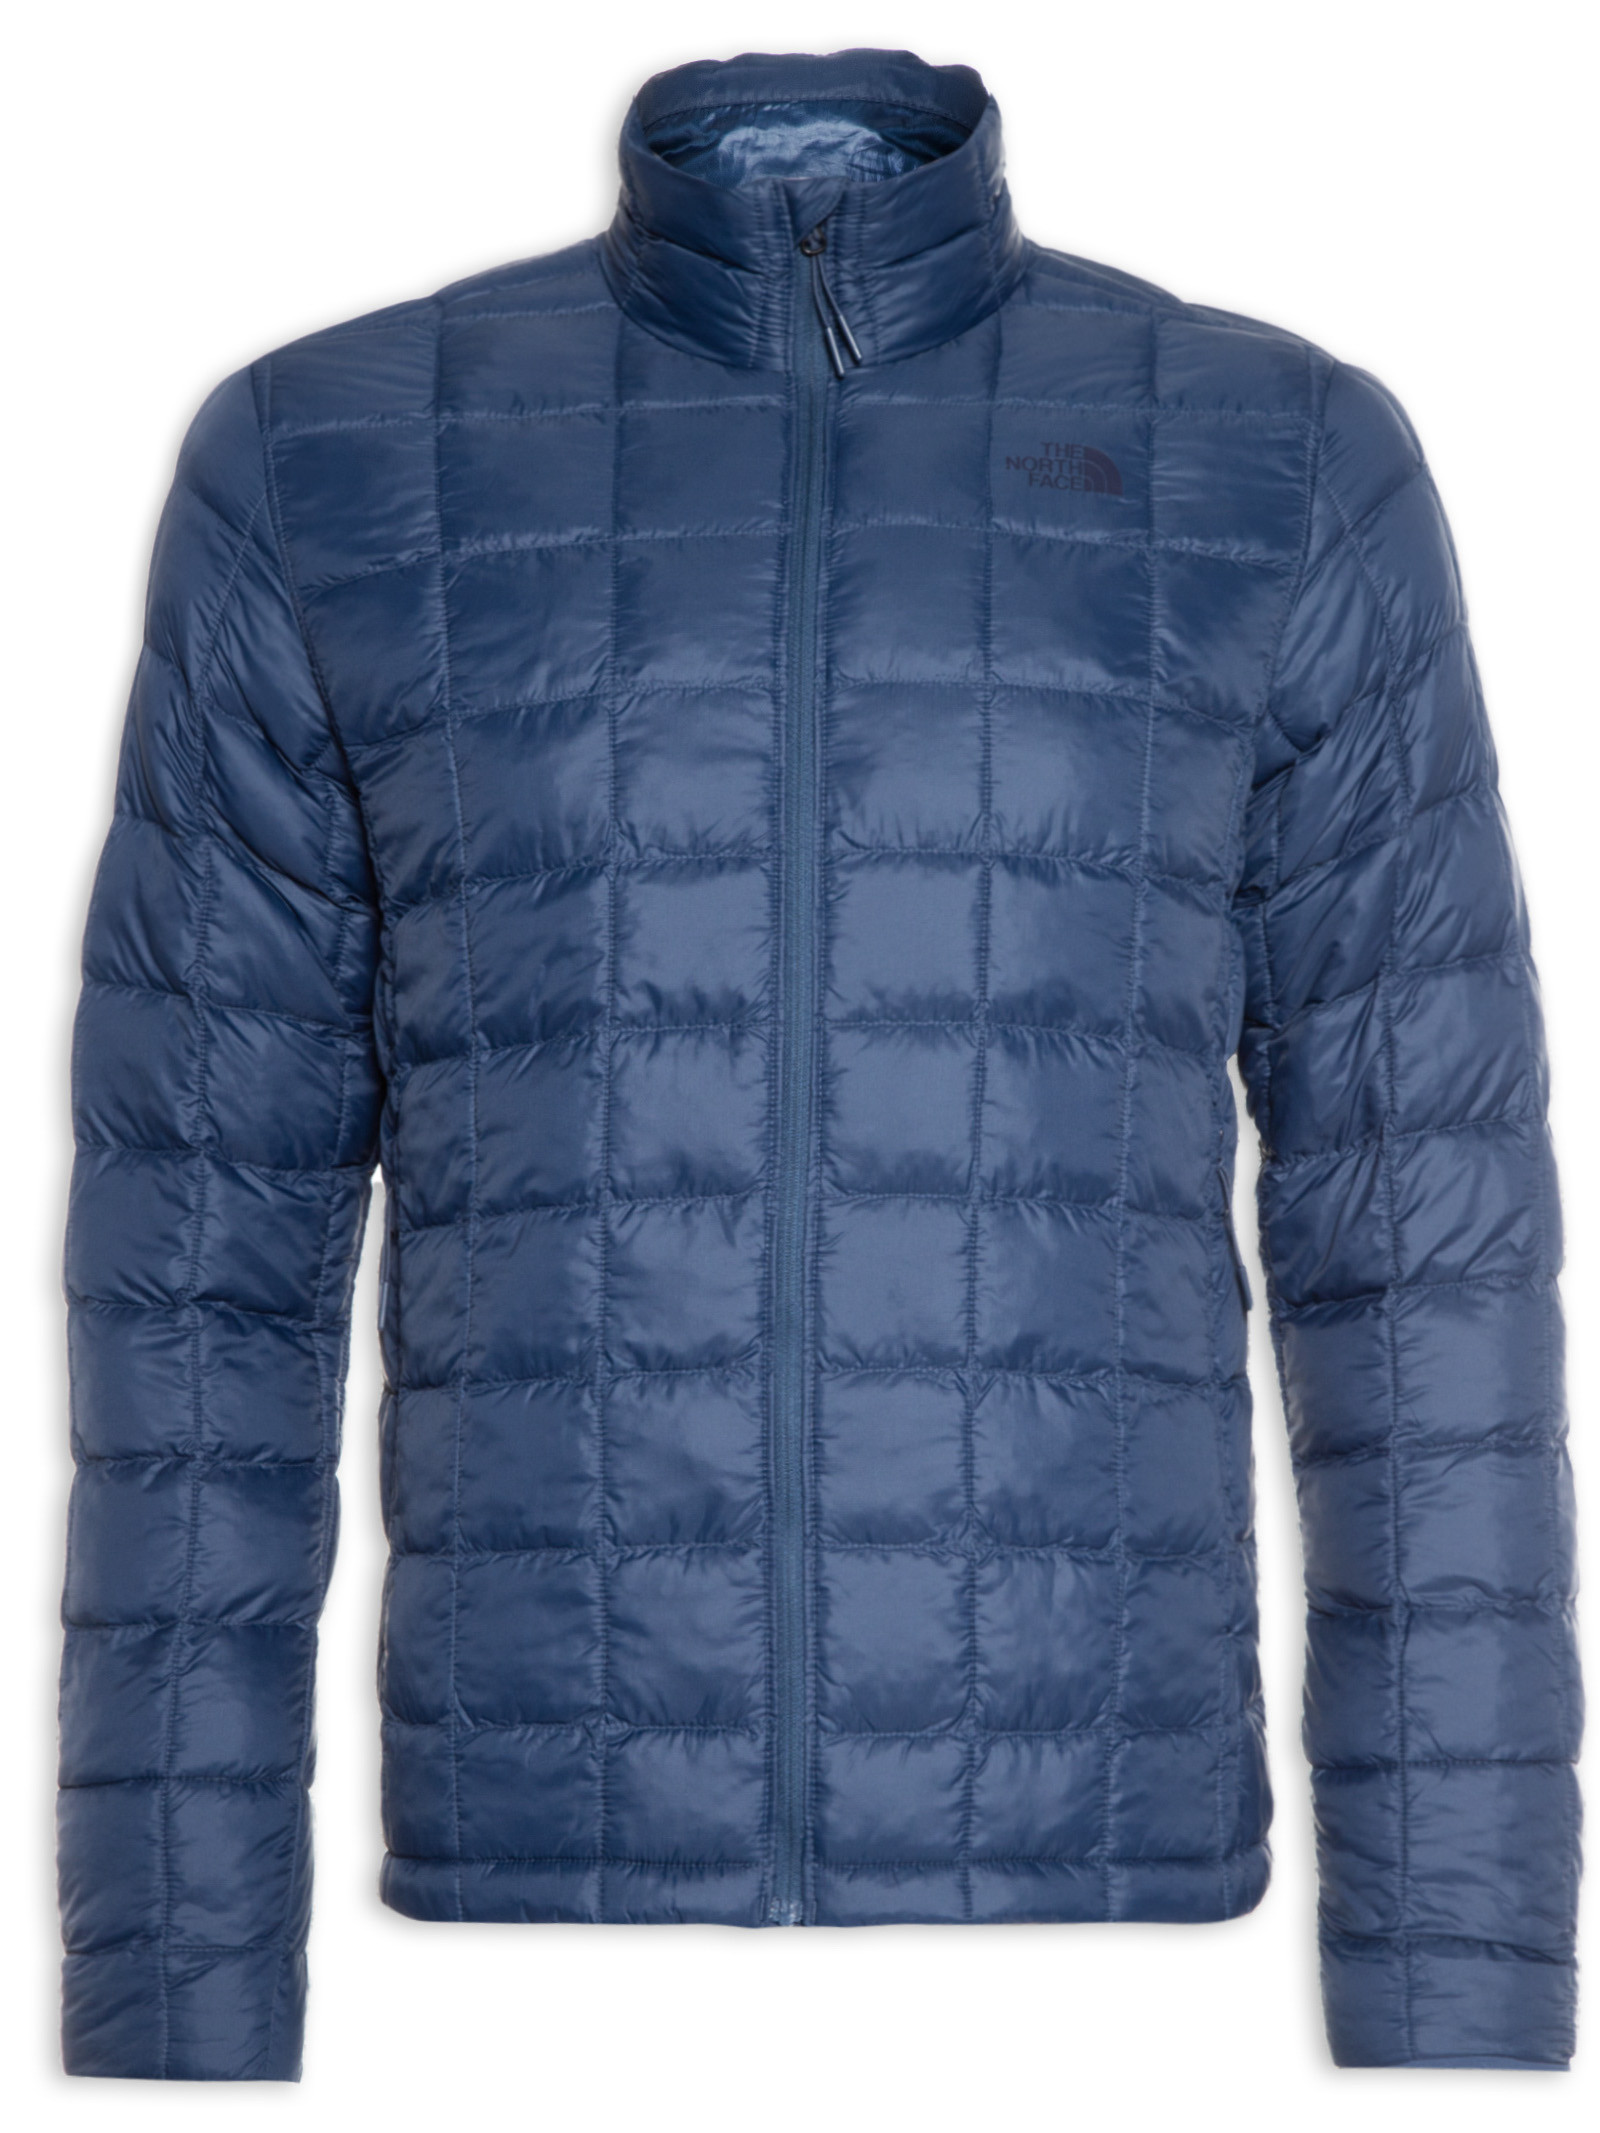 Jaqueta Masculina Thermoball Eco 2.0 - The North Face - Azul - Shop2gether